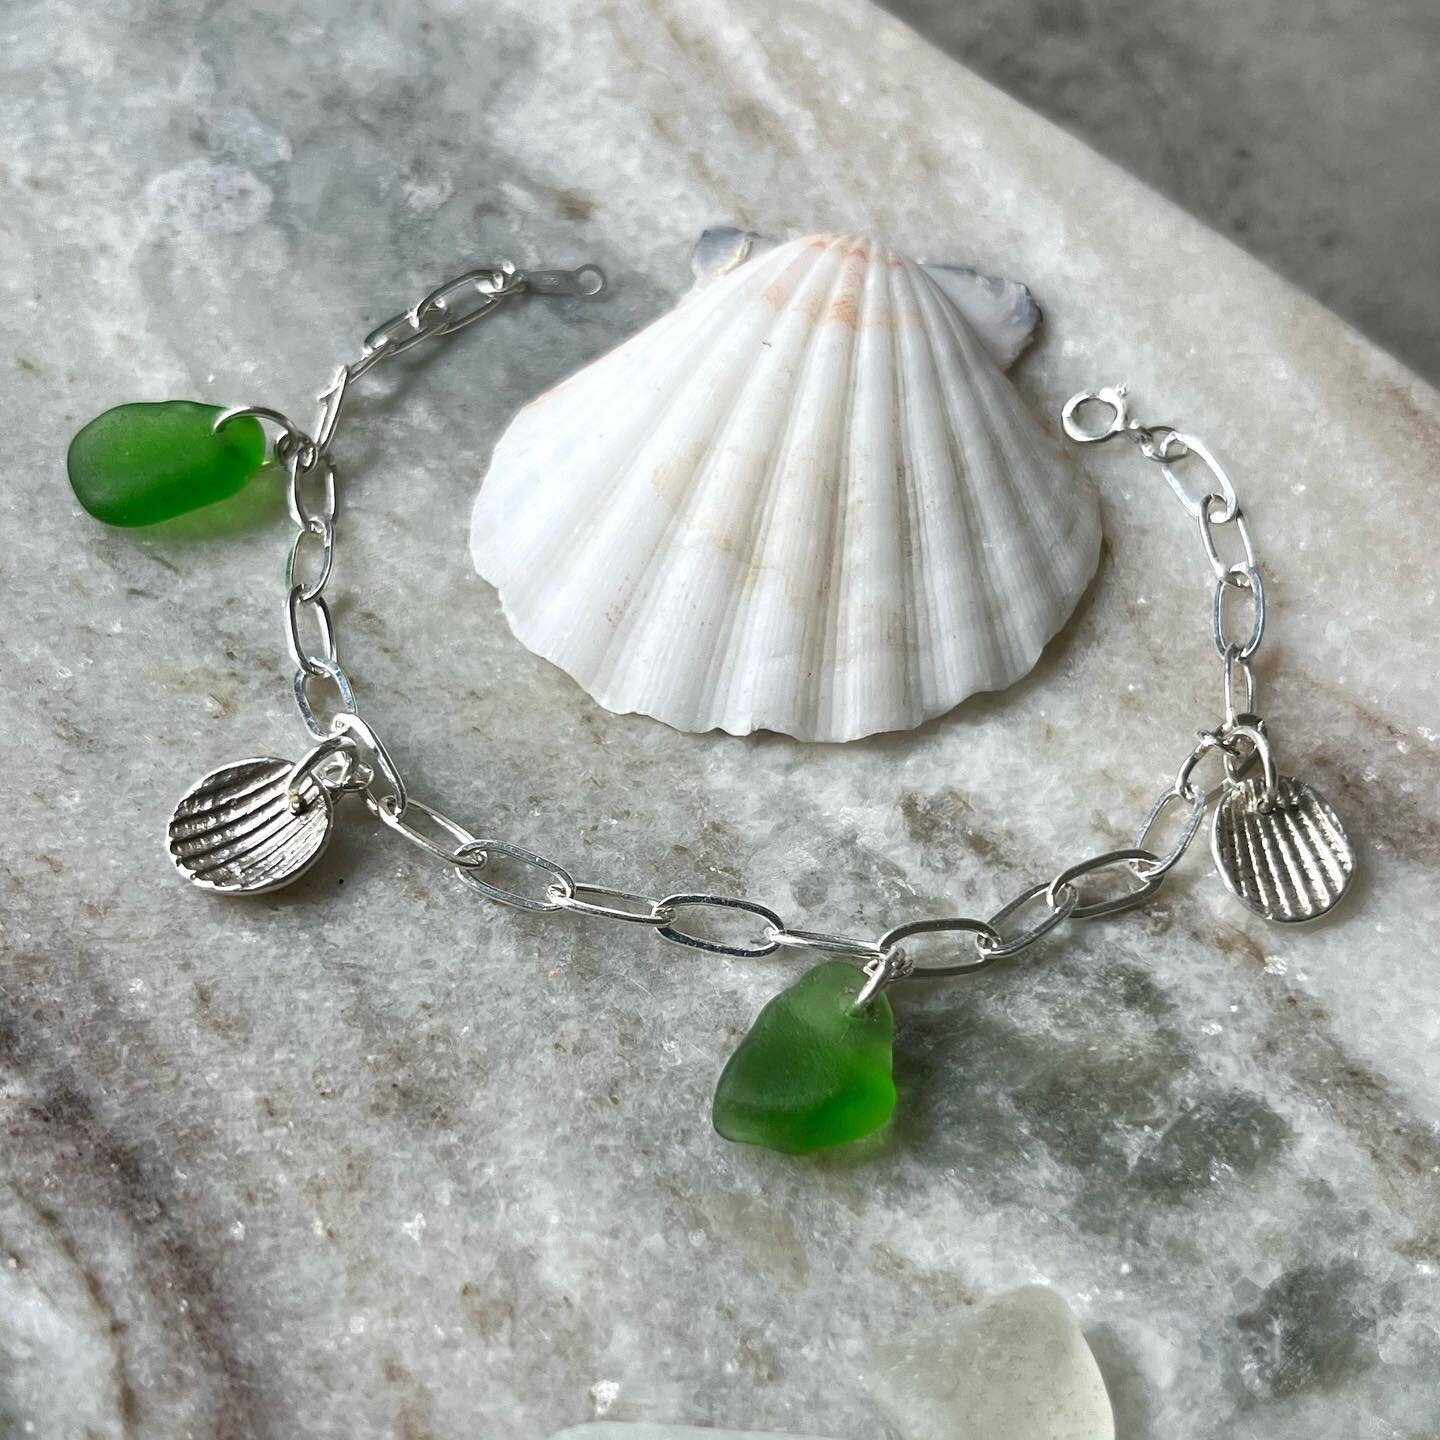 BRACE-LET YOURSELF!

For years l&rsquo;ve been asked if ever do sea glass bracelets.
In my signature&rdquo; better late than never!&rdquo; style, here they are!

I&rsquo;m starting with a super limited run- 4 unique silver and sea glass charm bracele